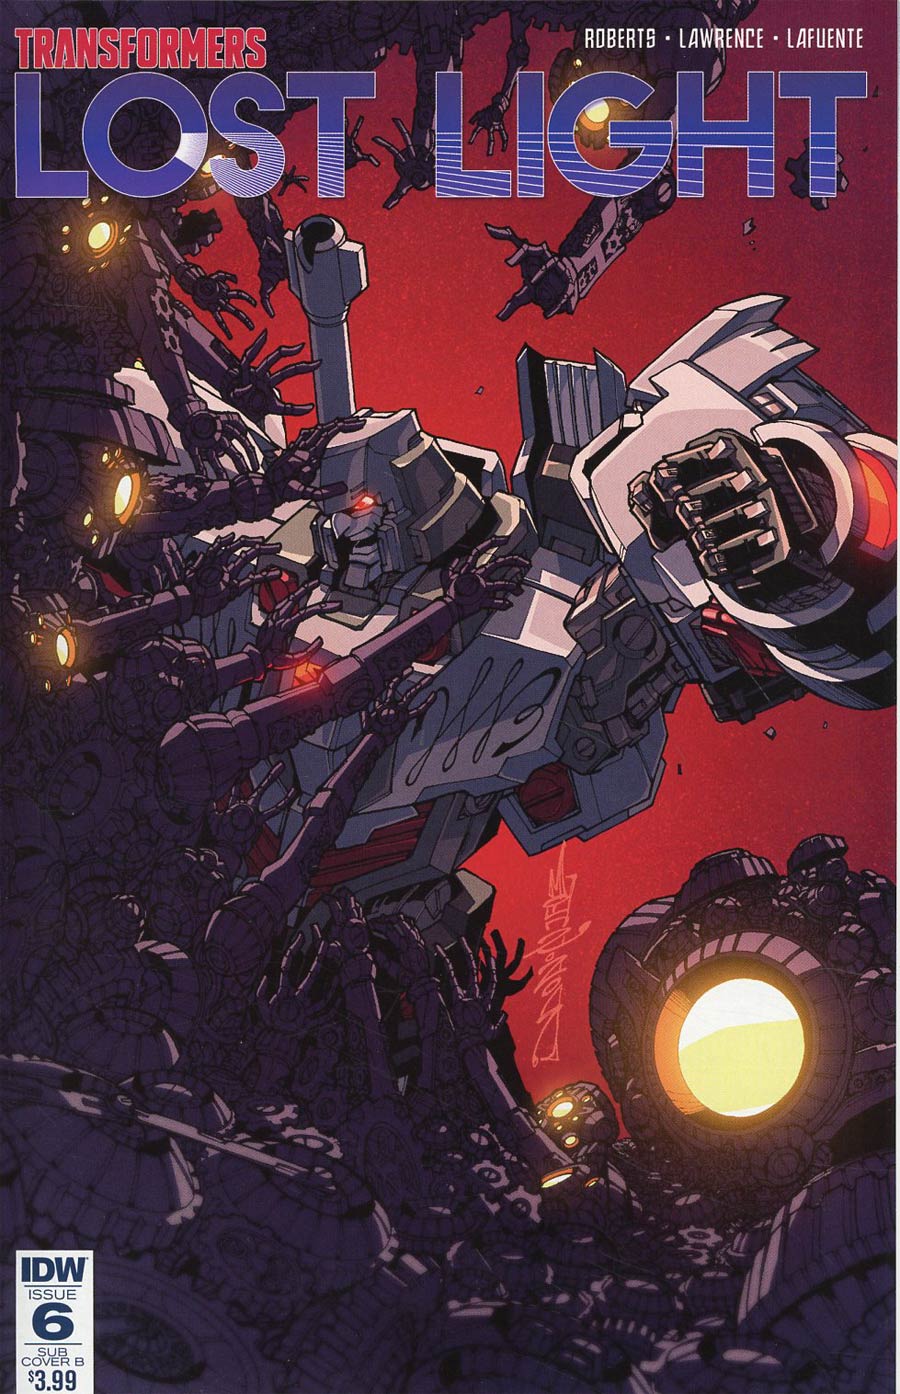 Transformers Lost Light #6 Cover C Variant Alex Milne Subscription Cover